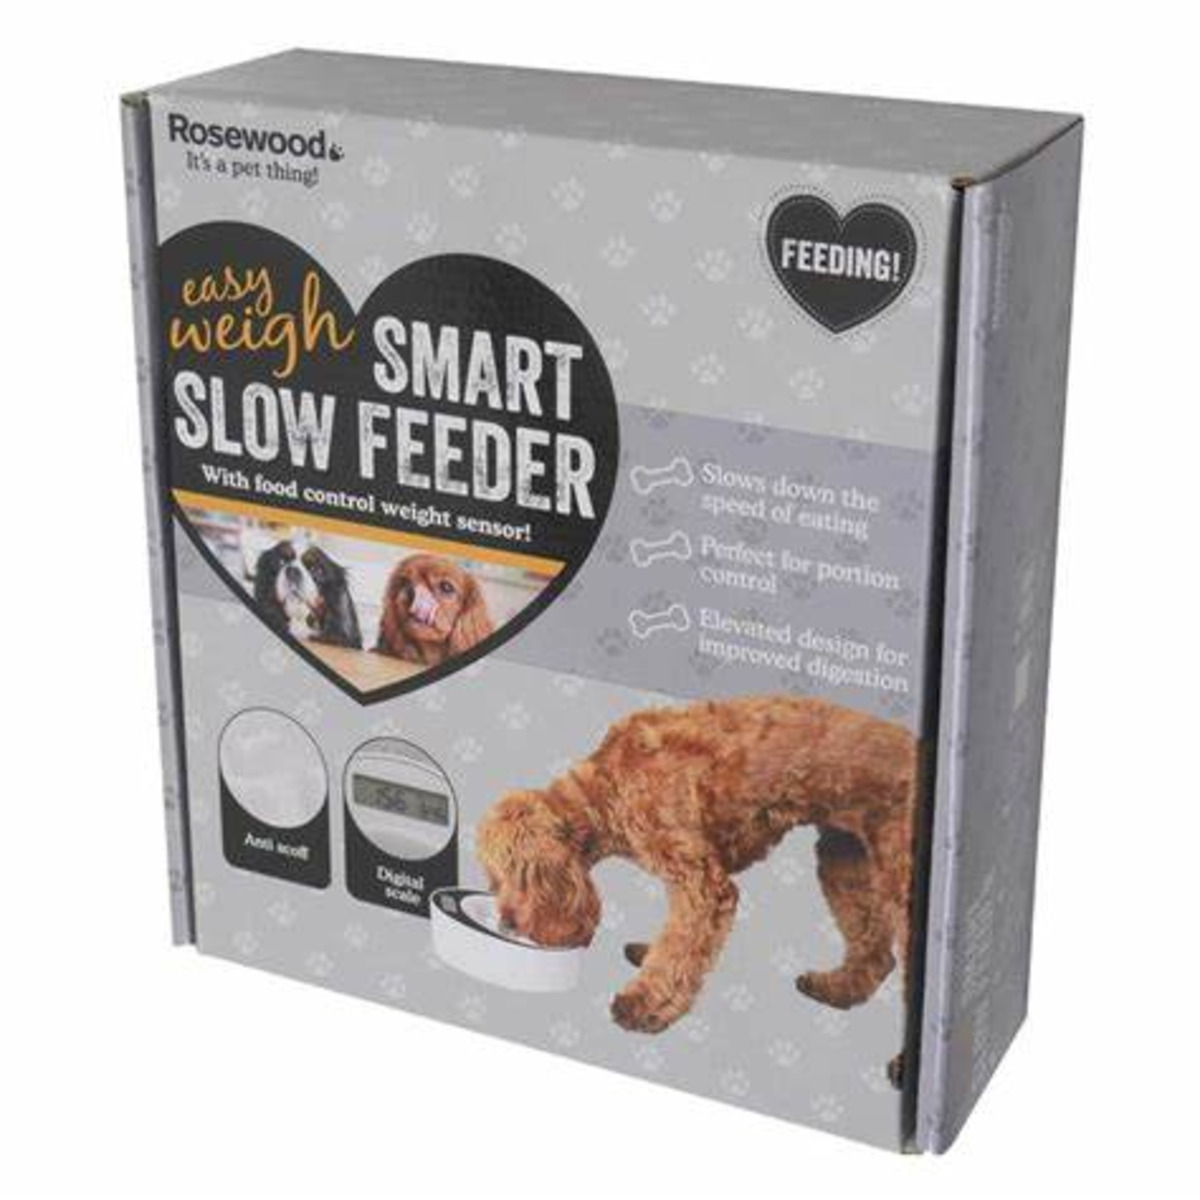 Rosewood Easy Weigh Smart Slow Feeder - Stefs Pet Pantry